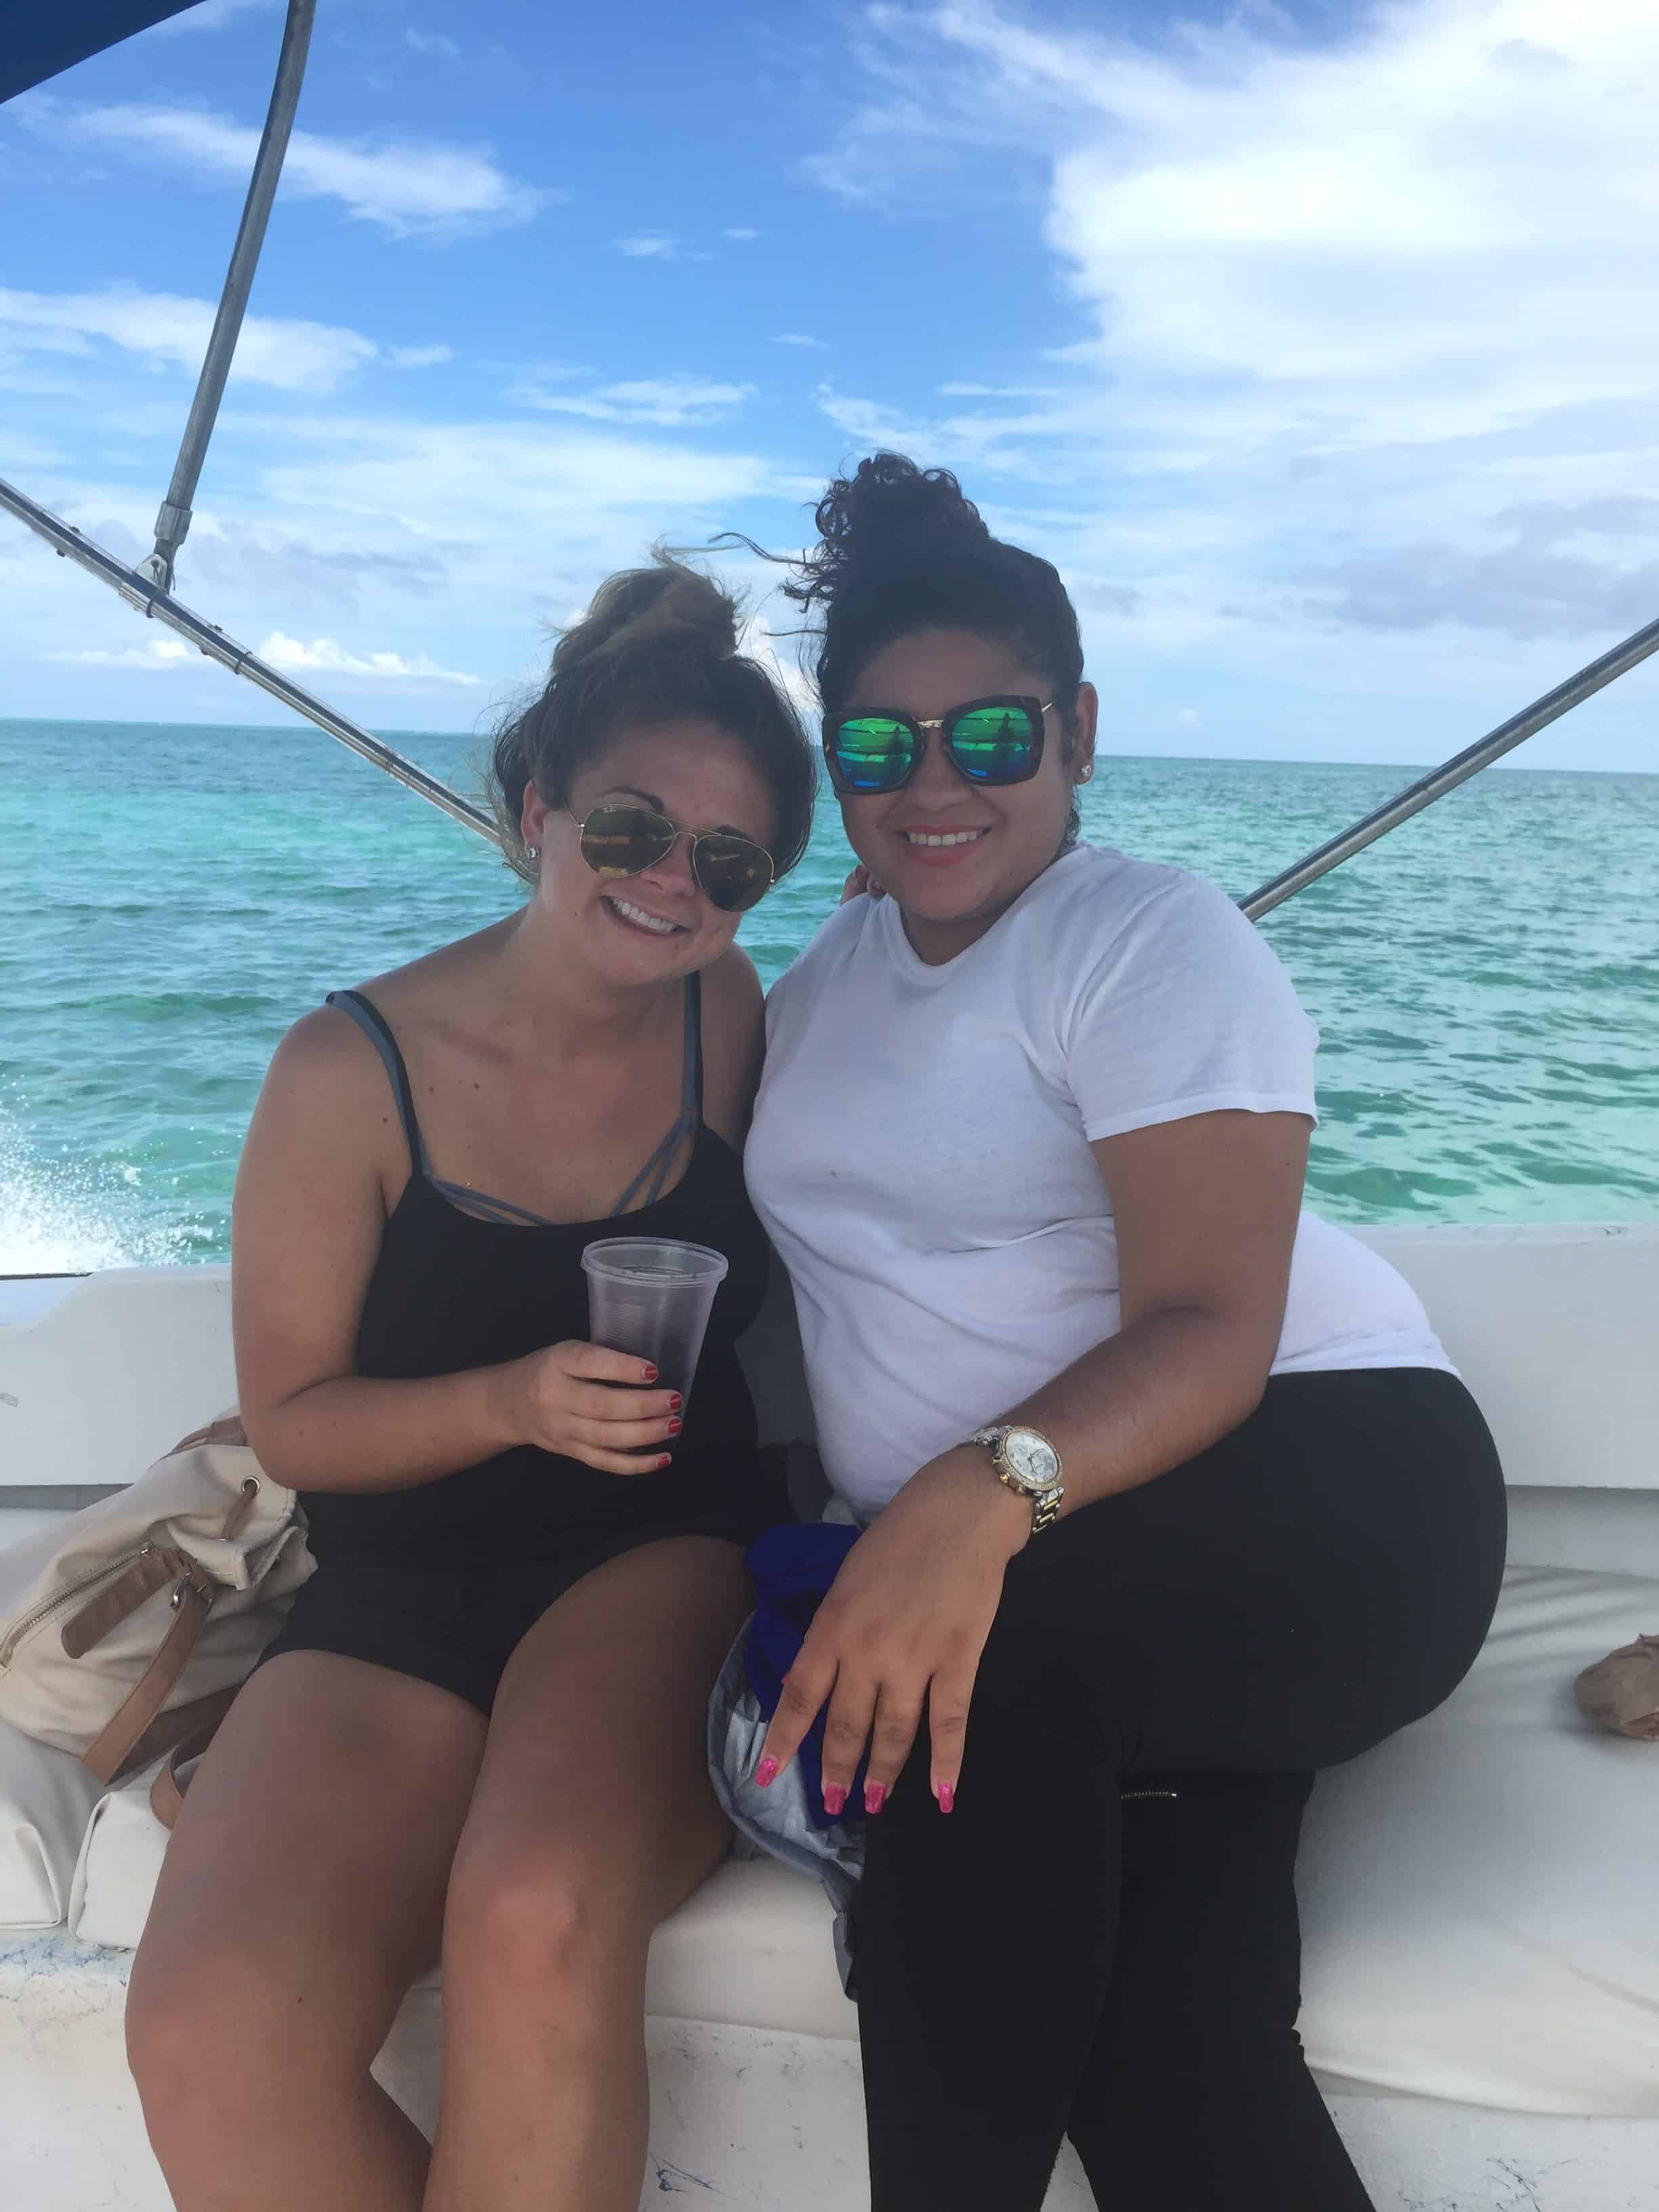 Boating to Bacalar Chico—Chronicles of Life in a New Land